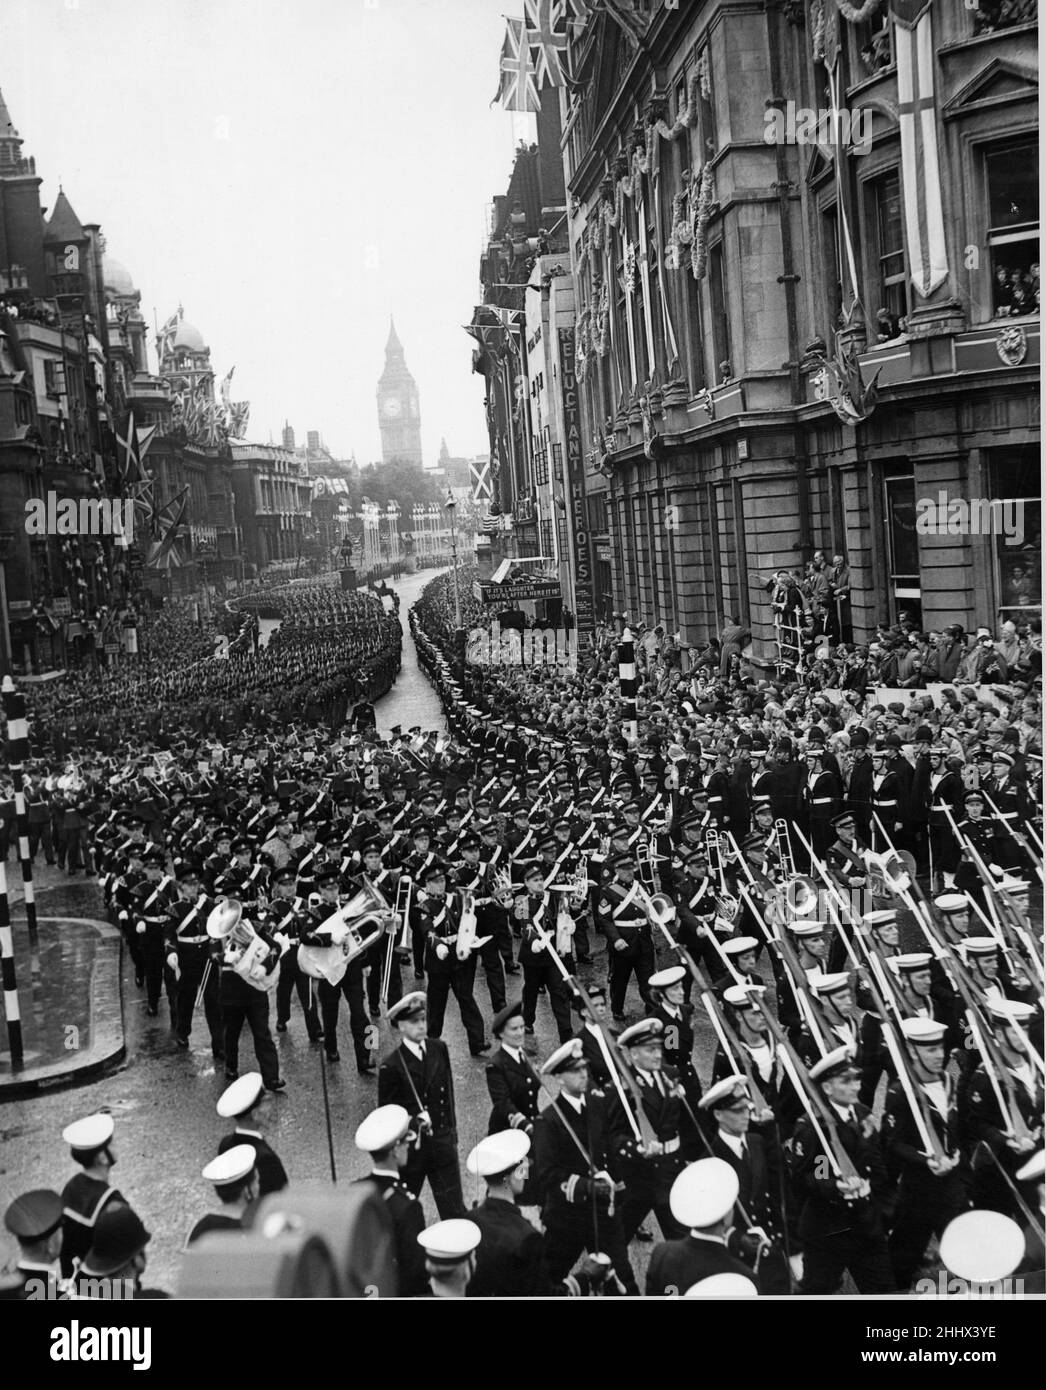 The armed service march along Whitehall after the Coronation of Queen Elizabeth II  at Westminster Abbey. The Contingent of the Royal Navy and Royal MarinesThe Officer Commanding the Contingent, Captain V. C. Begg, D.S.O., D.S.C., R.N. With detachments from: Royal Marines and Royal Marines Forces Volunteer Reserve. Followed by First Detachment of the Foot Guards The Officer Commanding the First Detachment, Lieut-Colonel B. O. P. Eugster, D.S.O., M.C., Irish Guards leading the Band of the Welsh Guards, Band of the Irish Guards, The Corps of Drums of the 1st Bn. Welsh Guards and the Corps of Dru Stock Photo